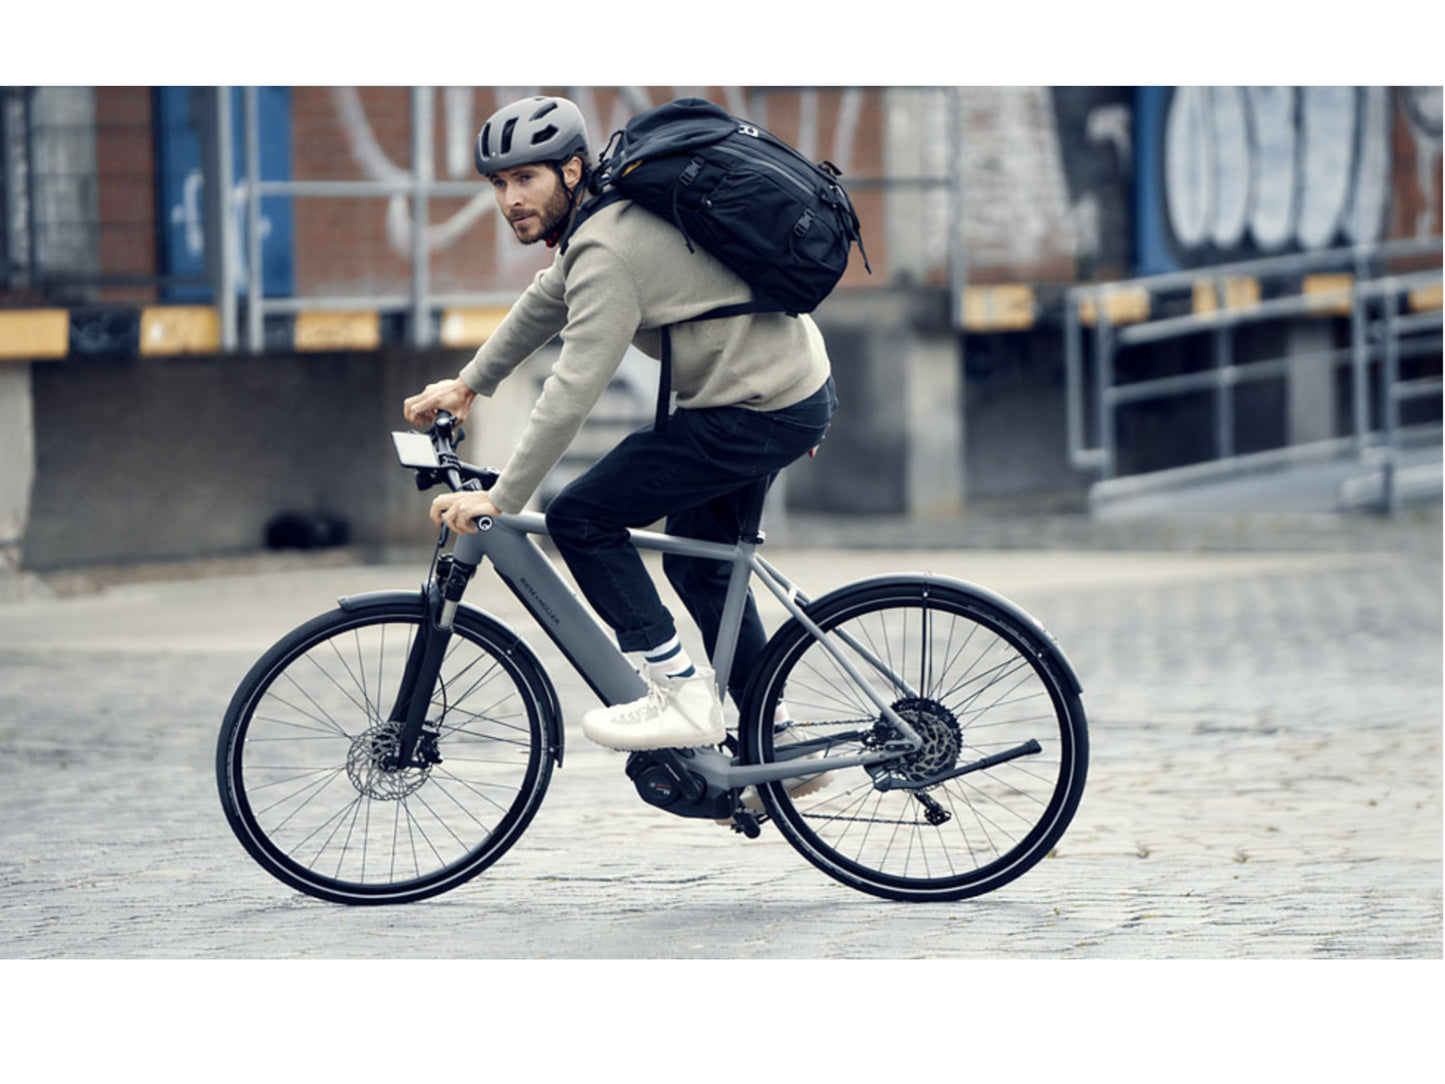 Riese and Muller Roadster Vario HS eMTB hardtail man touring with backpack smartphone cockpit